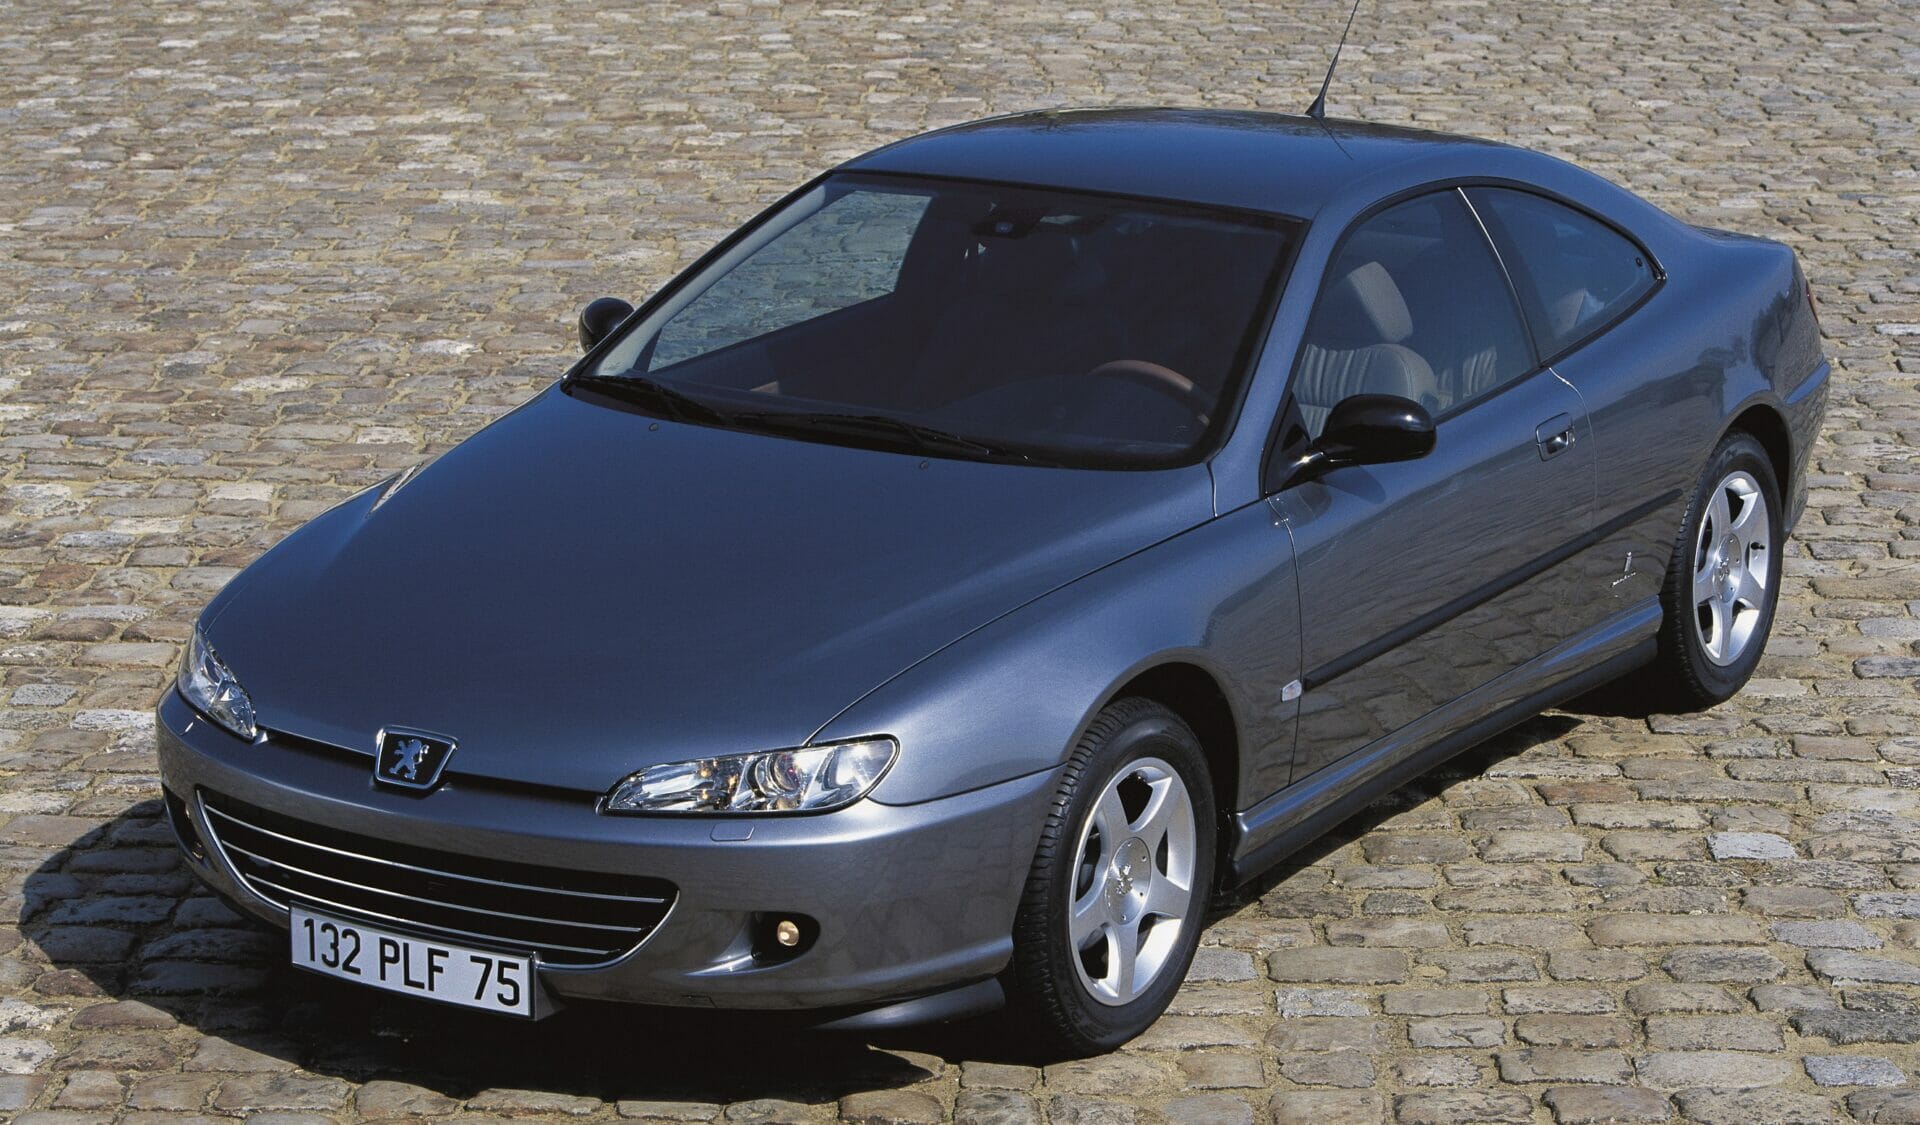 Curbside Classic: Peugeot 406 Coupe: The Last Of An Elegant Line